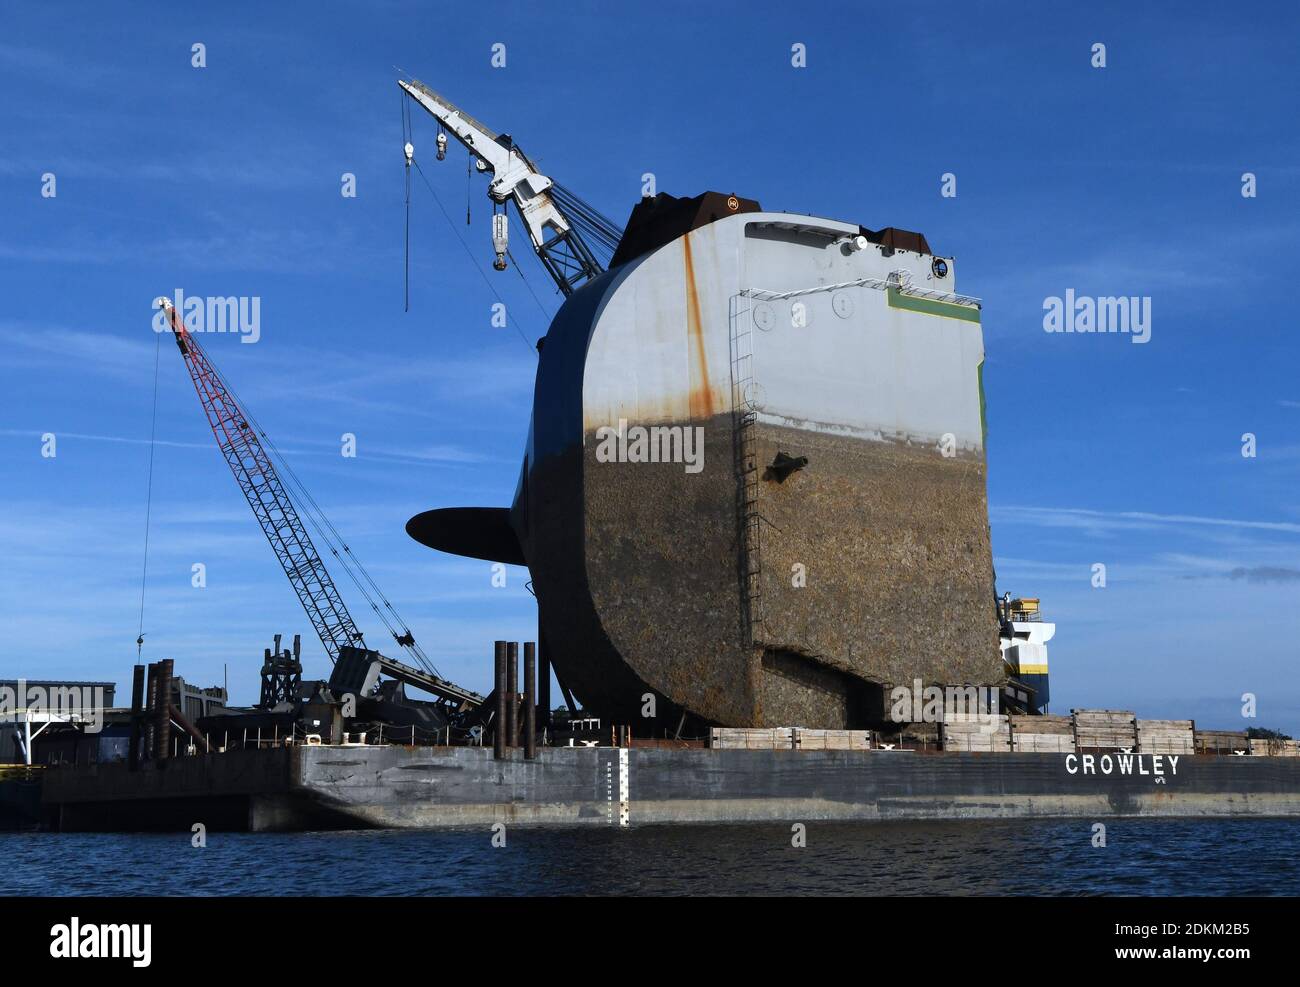 Georgia, USA. 14th Dec, 2020. December 14, 2020 - Brunswick, Georgia, United States - The bow section of the Golden Ray cargo ship sits on a barge on December 14, 2020 in Brunswick, Georgia. A salvage company is cutting the vessel into eight segments, each of which will be removed by a barge and scrapped. The vehicle carrier, loaded with 4200 new cars, capsized in St. Simons Island Sound on September 8, 2019 as it was leaving the Port of Brunswick, Georgia. (Paul Hennessy/Alamy) Credit: Paul Hennessy/Alamy Live News Stock Photo